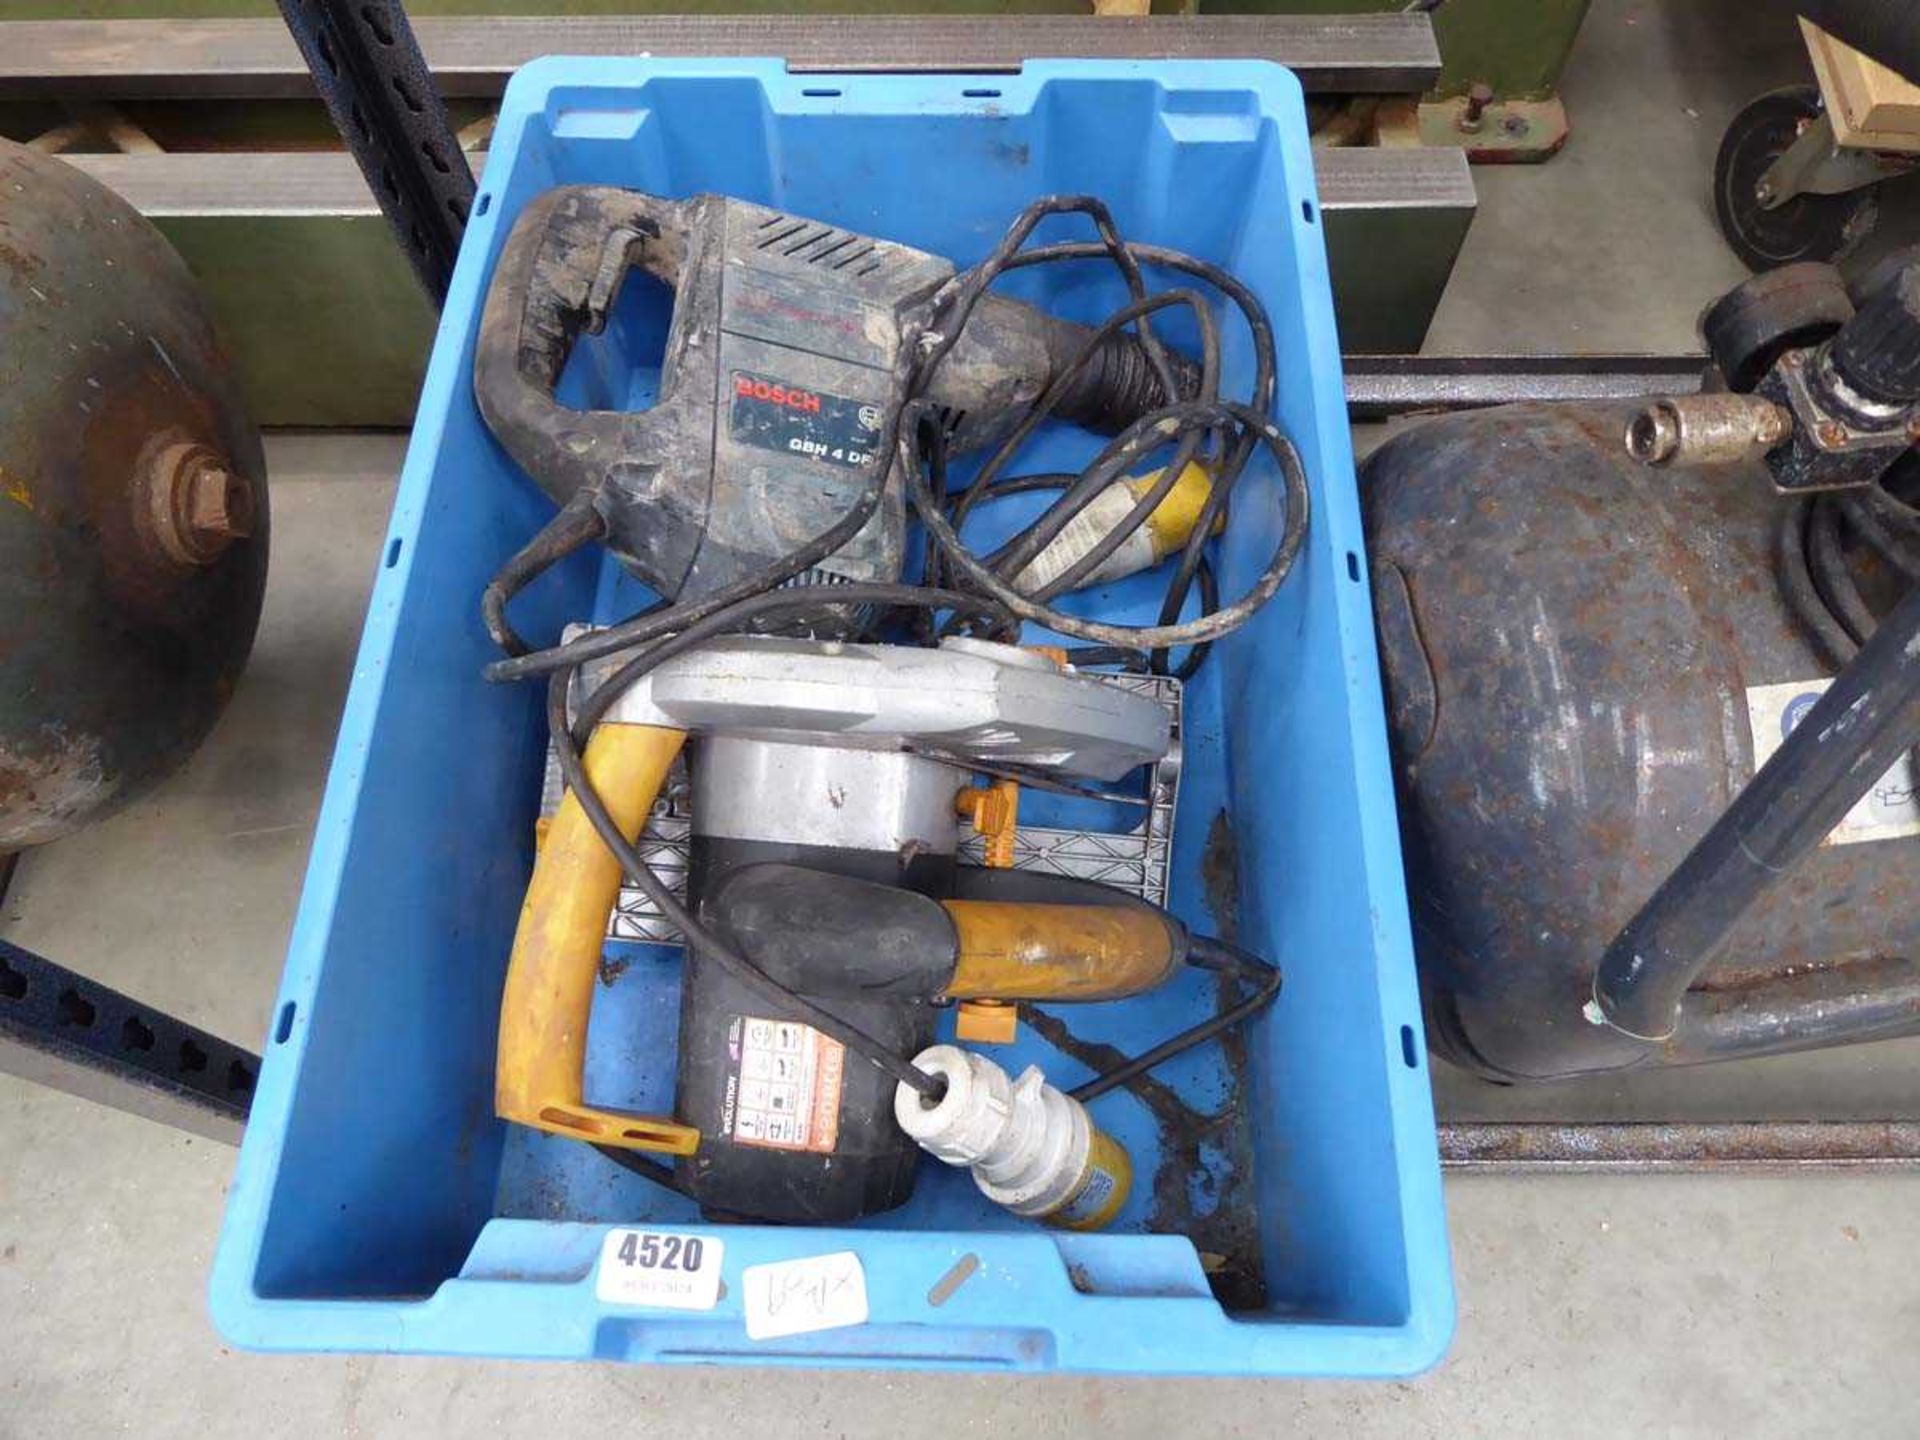 Blue crate containing Bosch GBH4DFE 110v breaker and a circular saw